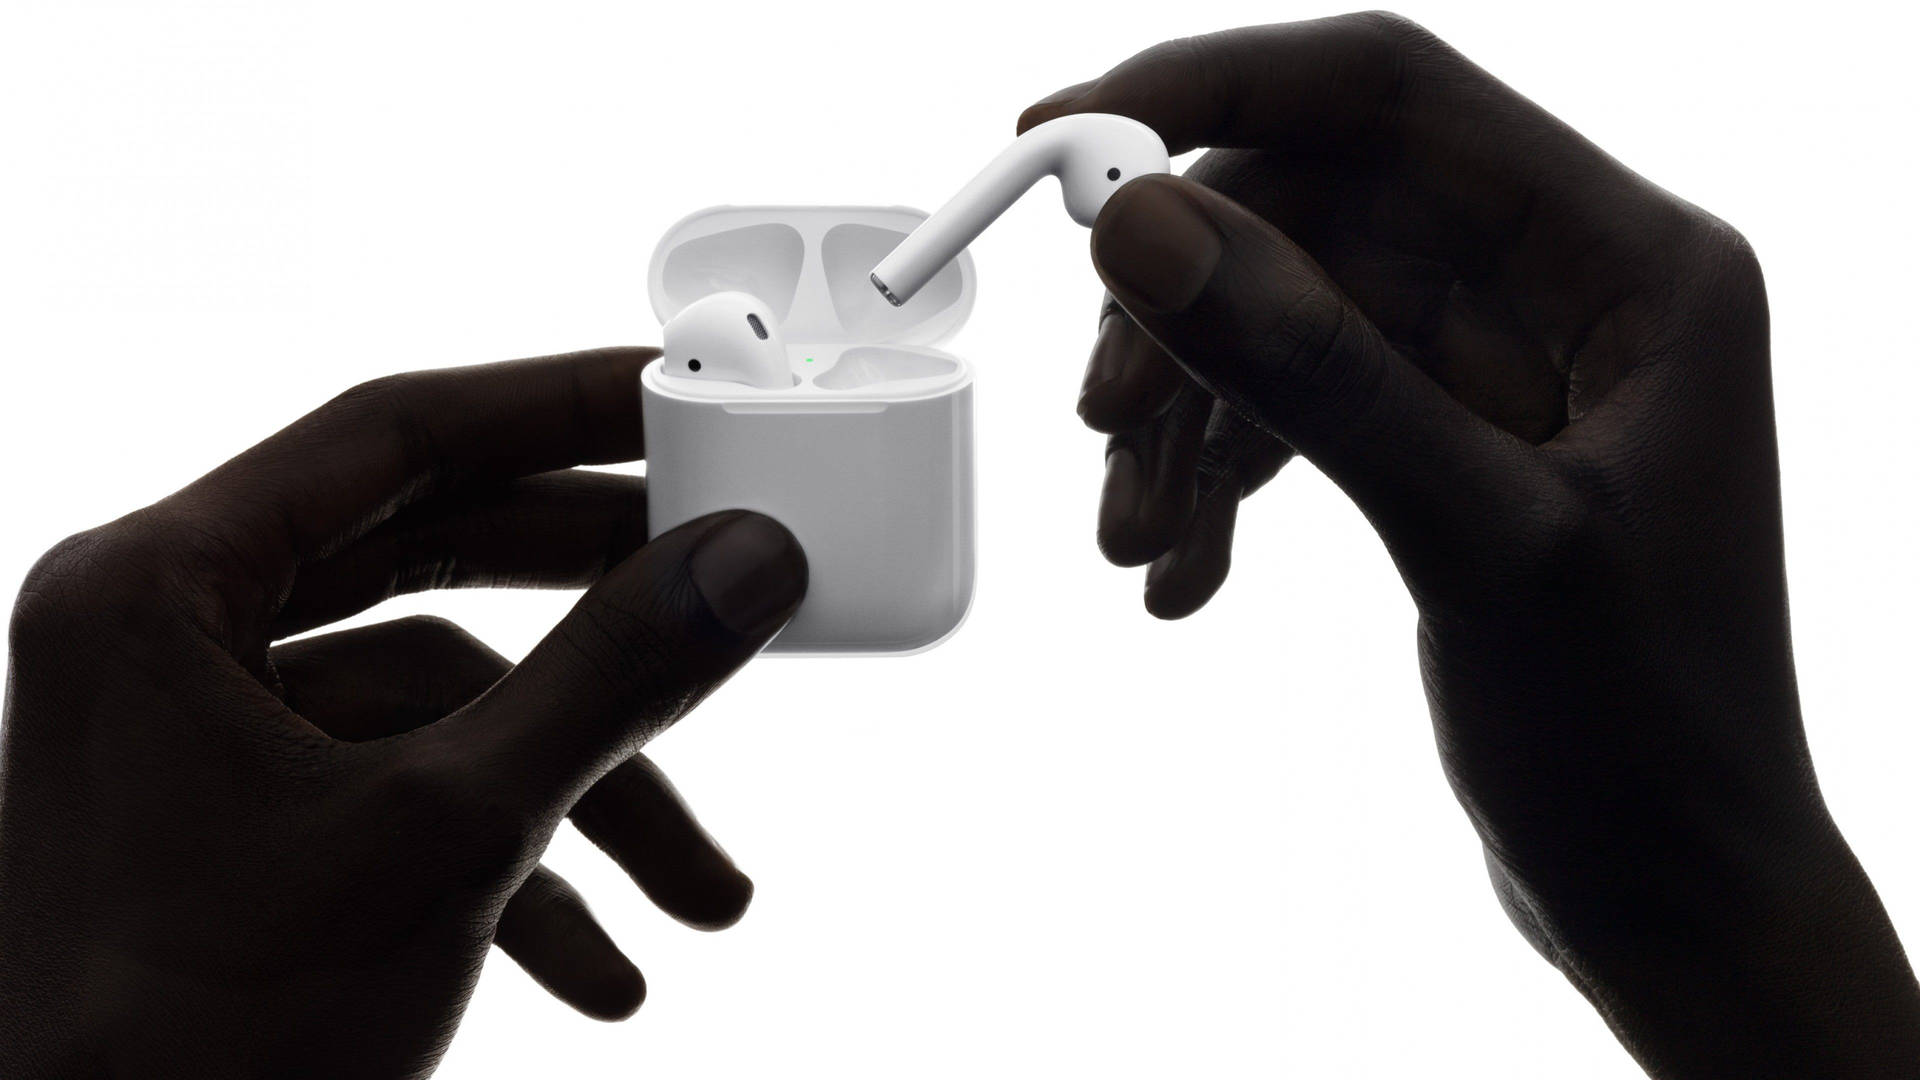 Apple Airpods 2nd Generation Wallpaper